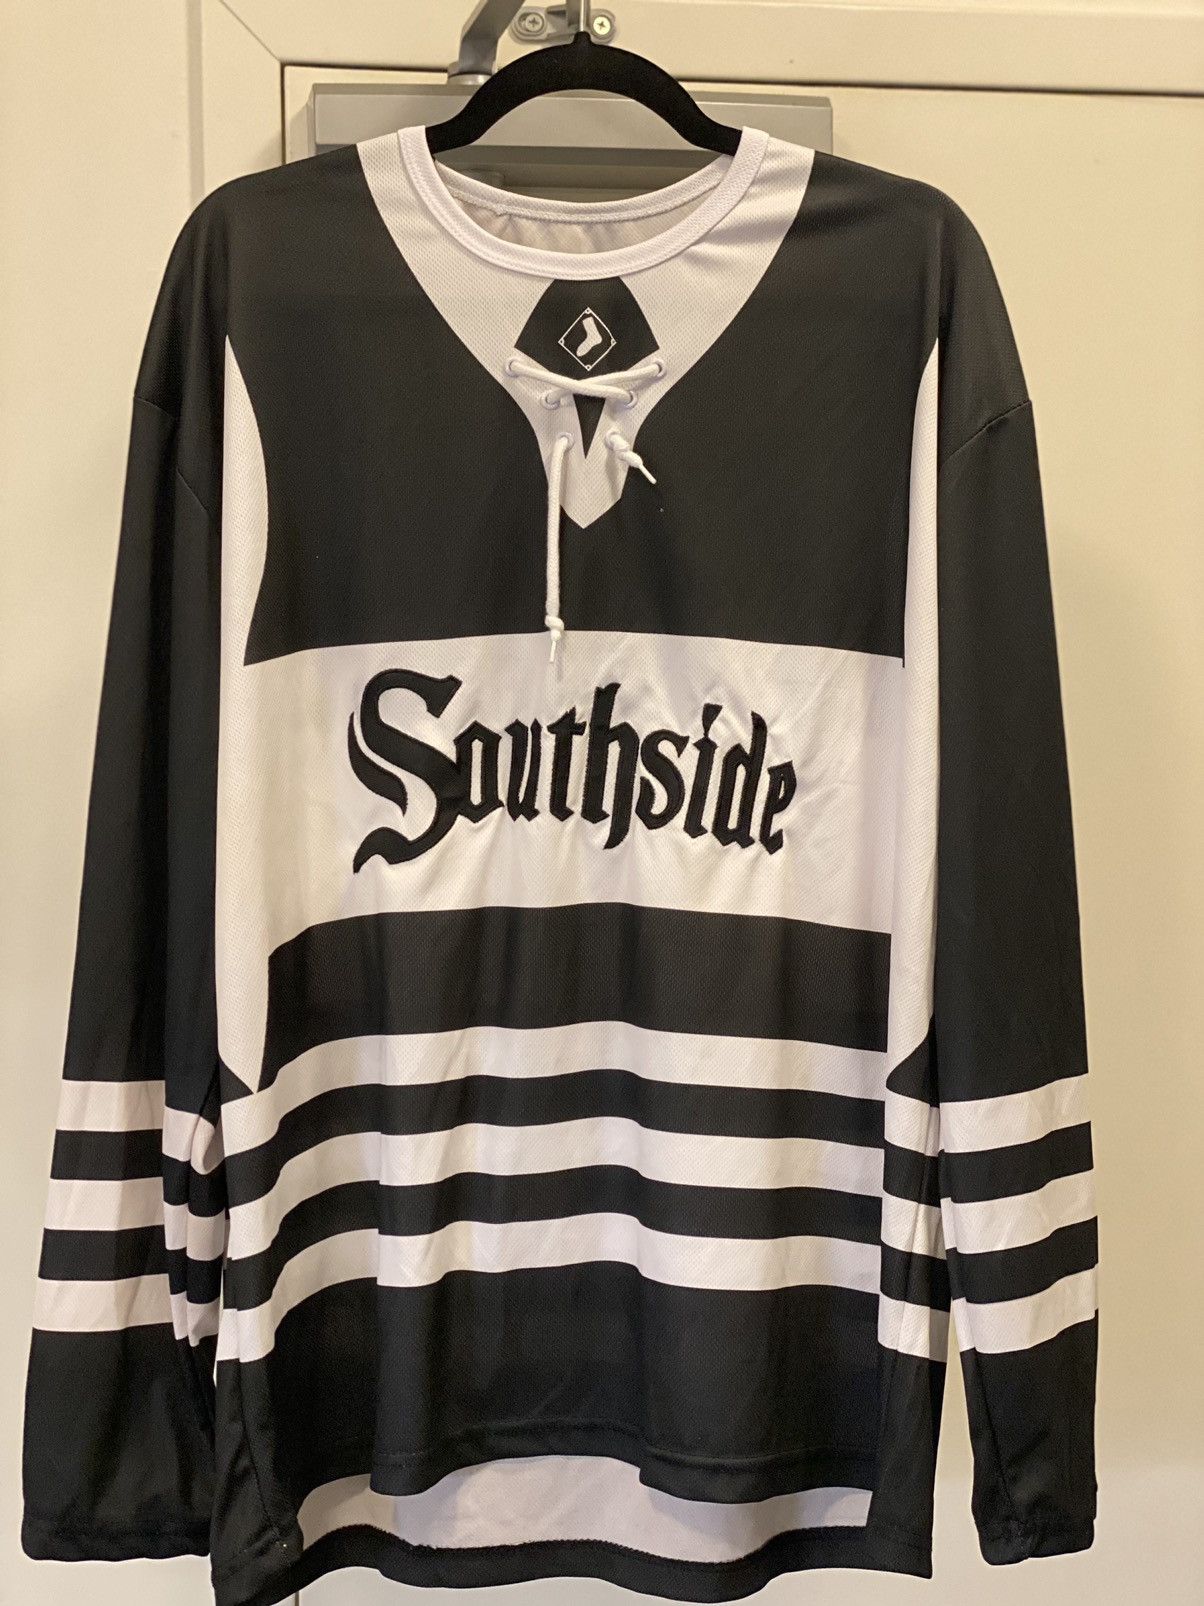 MLB Chicago White Sox “Southside” Gameday Giveaway Hockey Jersey